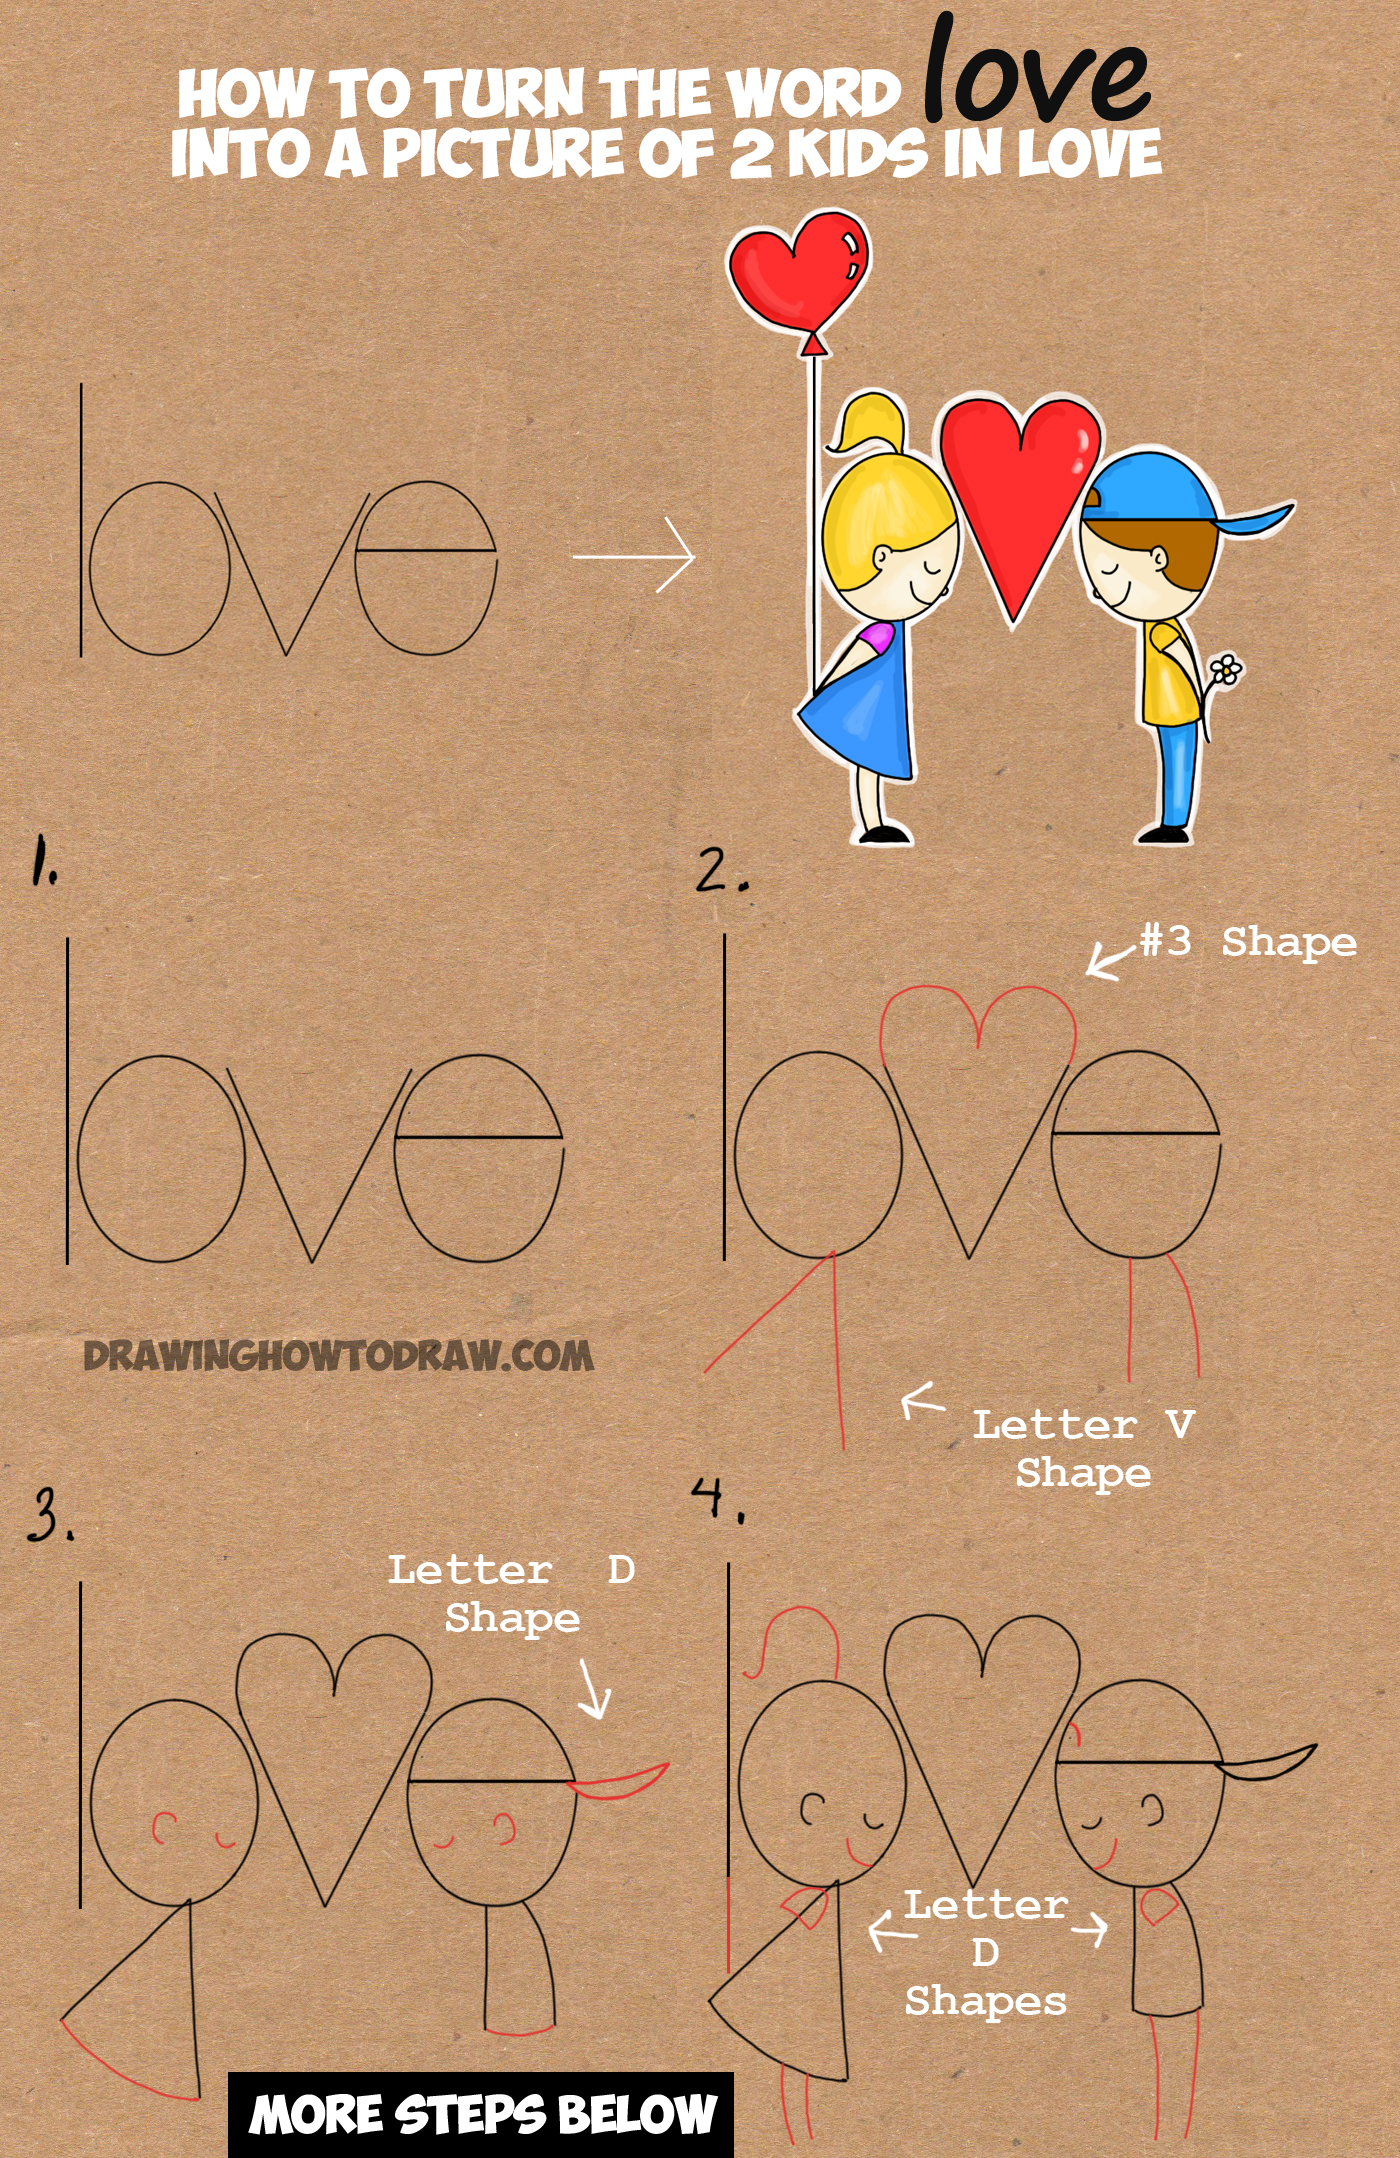 Learn How to Draw Cartoon Kids in Love from the Word Love in this Easy Words Cartoon Drawing Lesson for Children